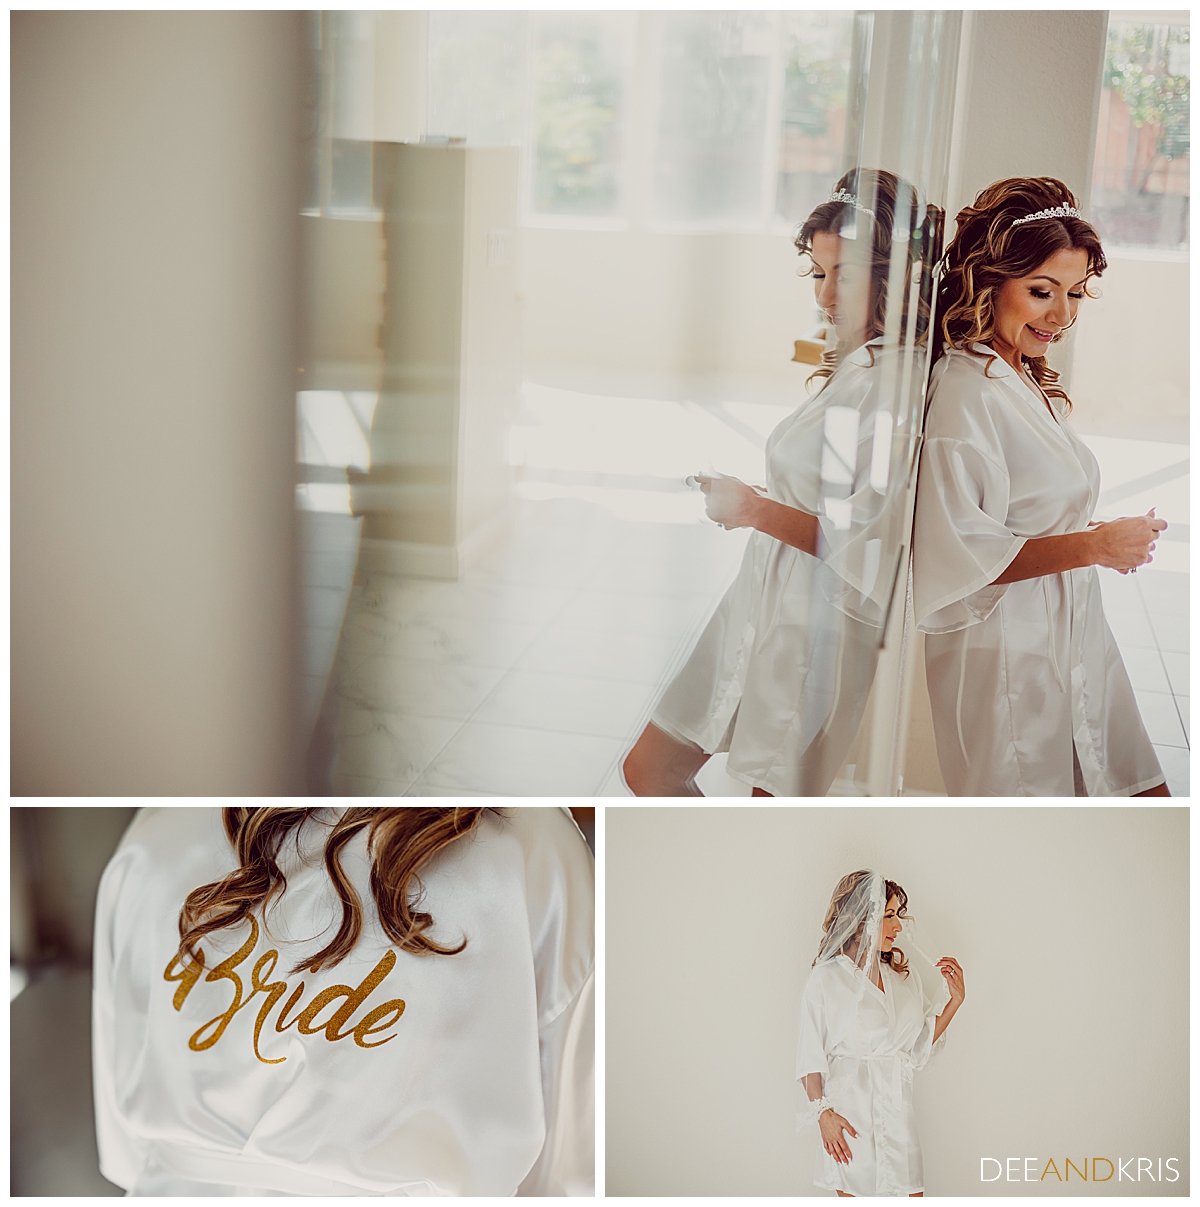 Three images: Top image of bride standing against window with reflection. Bottom left image of bride in silk robe with word "bride" on back. Bottom right image of bride in silk robe and veil looking to the right.